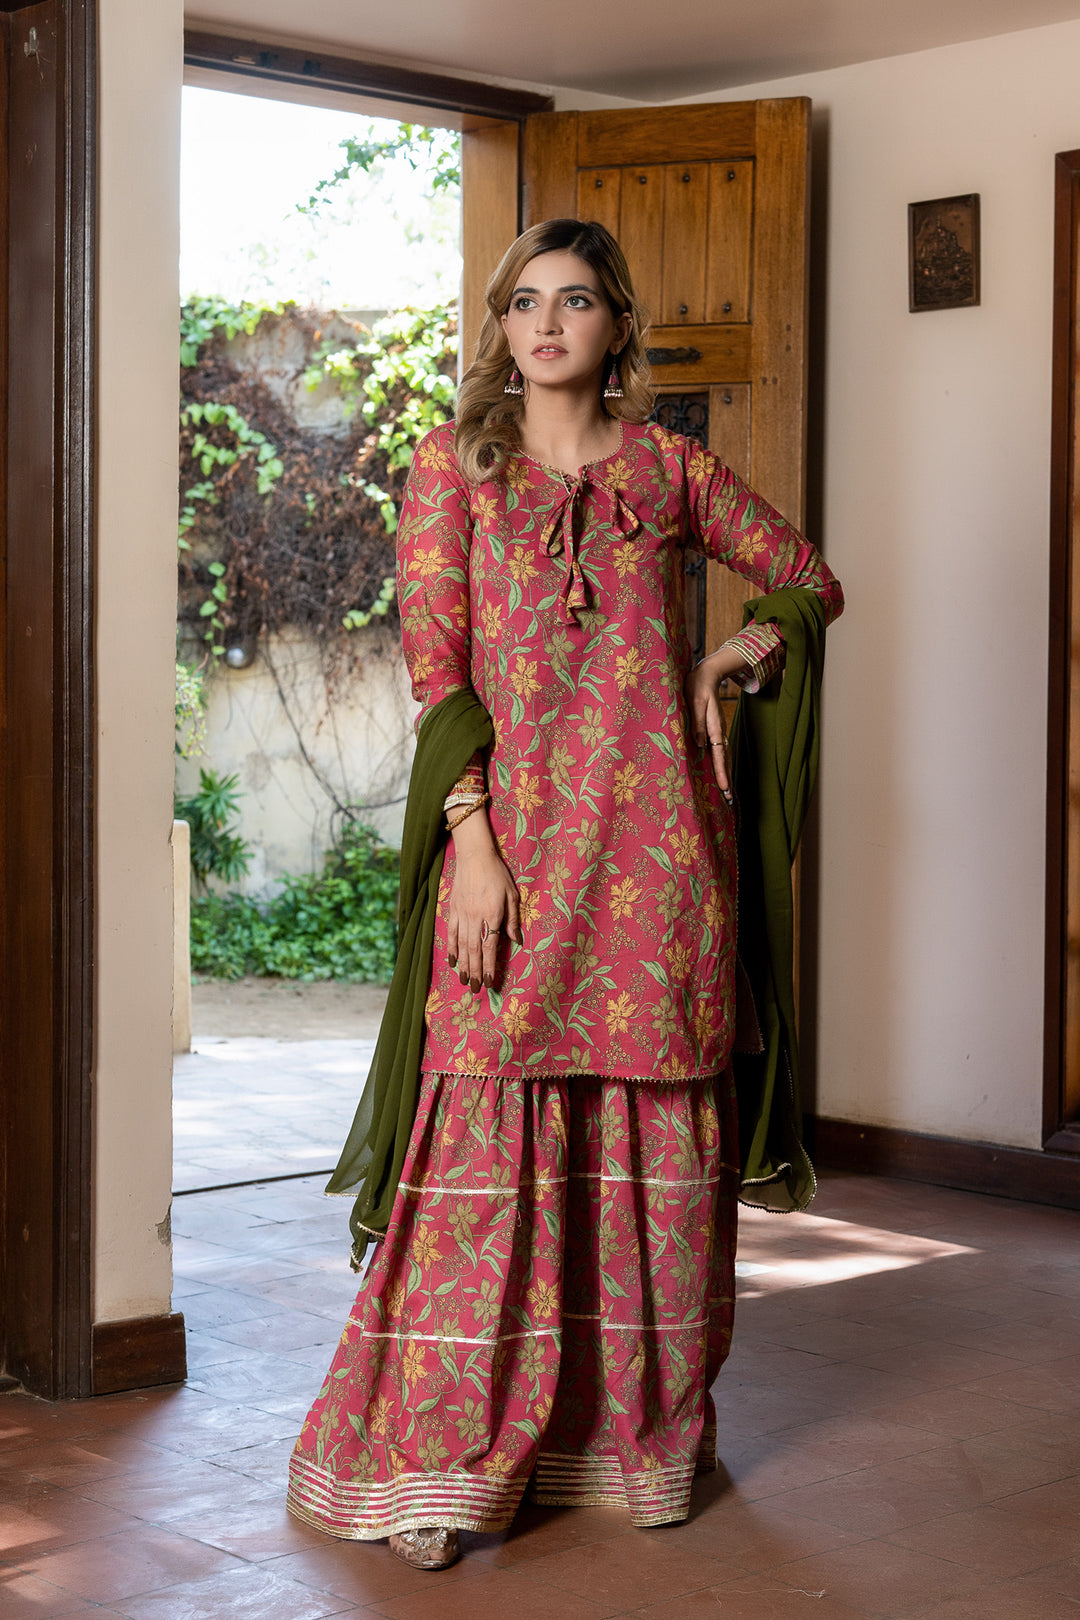 7 Spring Must-Haves for Desi Fashionistas